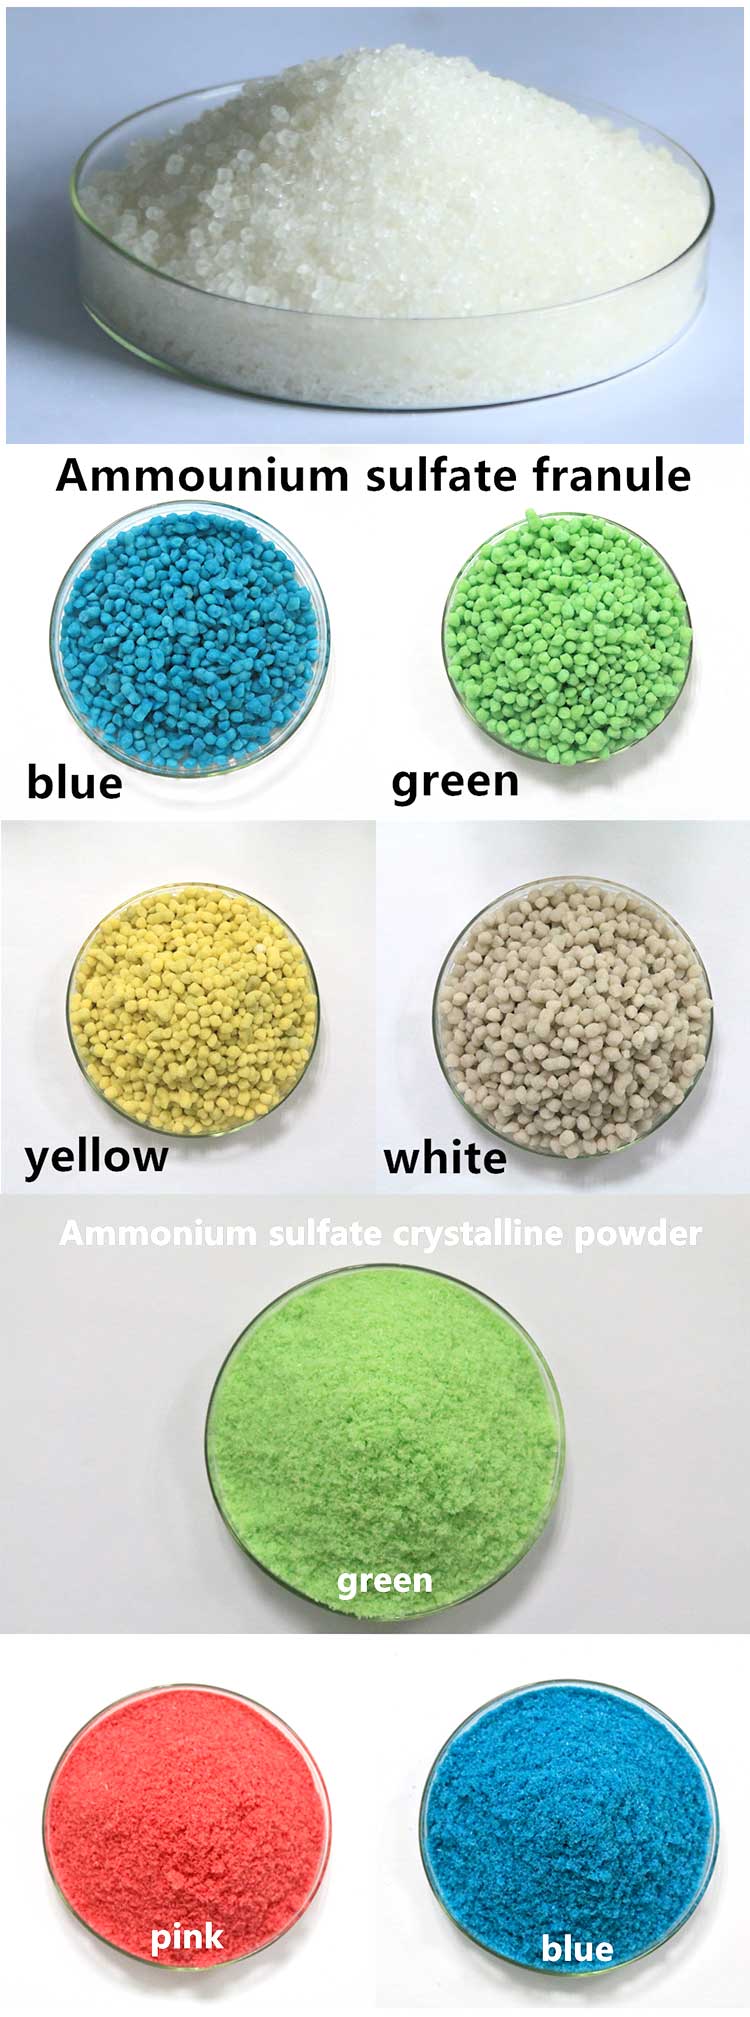 top exporter and distributor Ammonium sulphate granular with competitive price